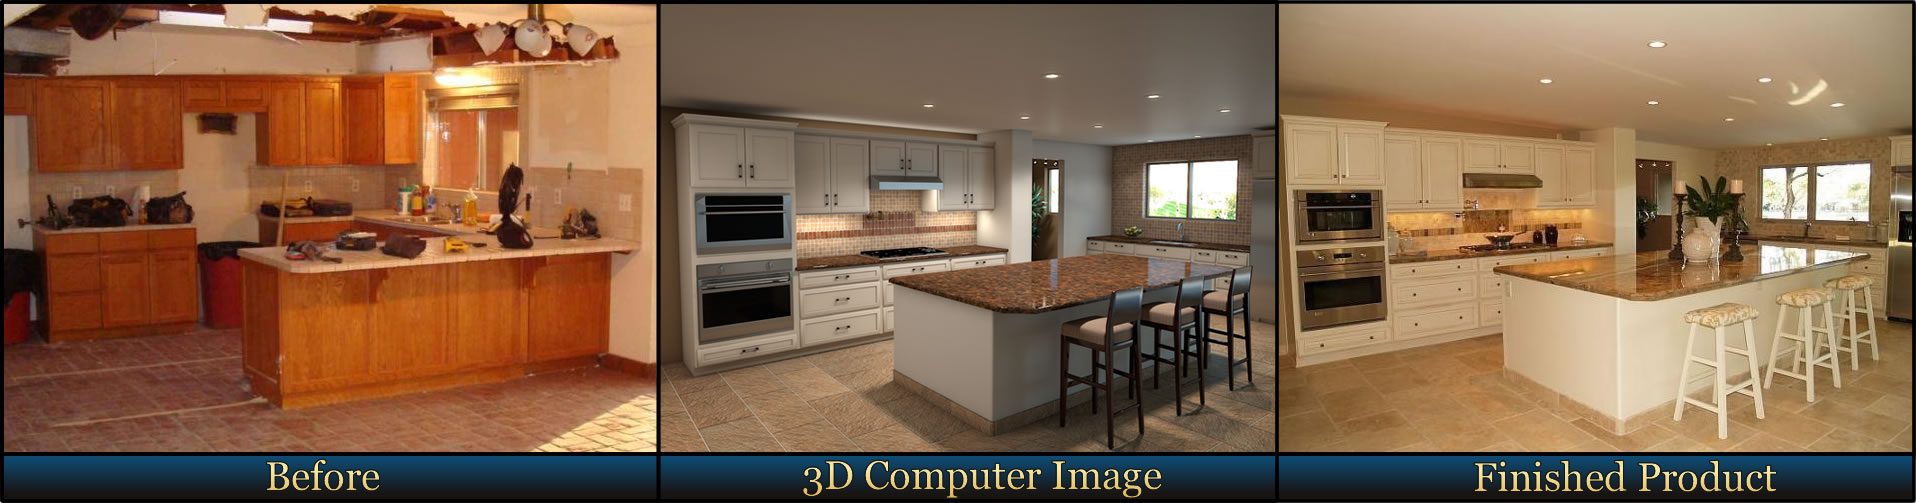 Kitchen Remodel, Before, 3d Digital Virtual View, and After Project Completion